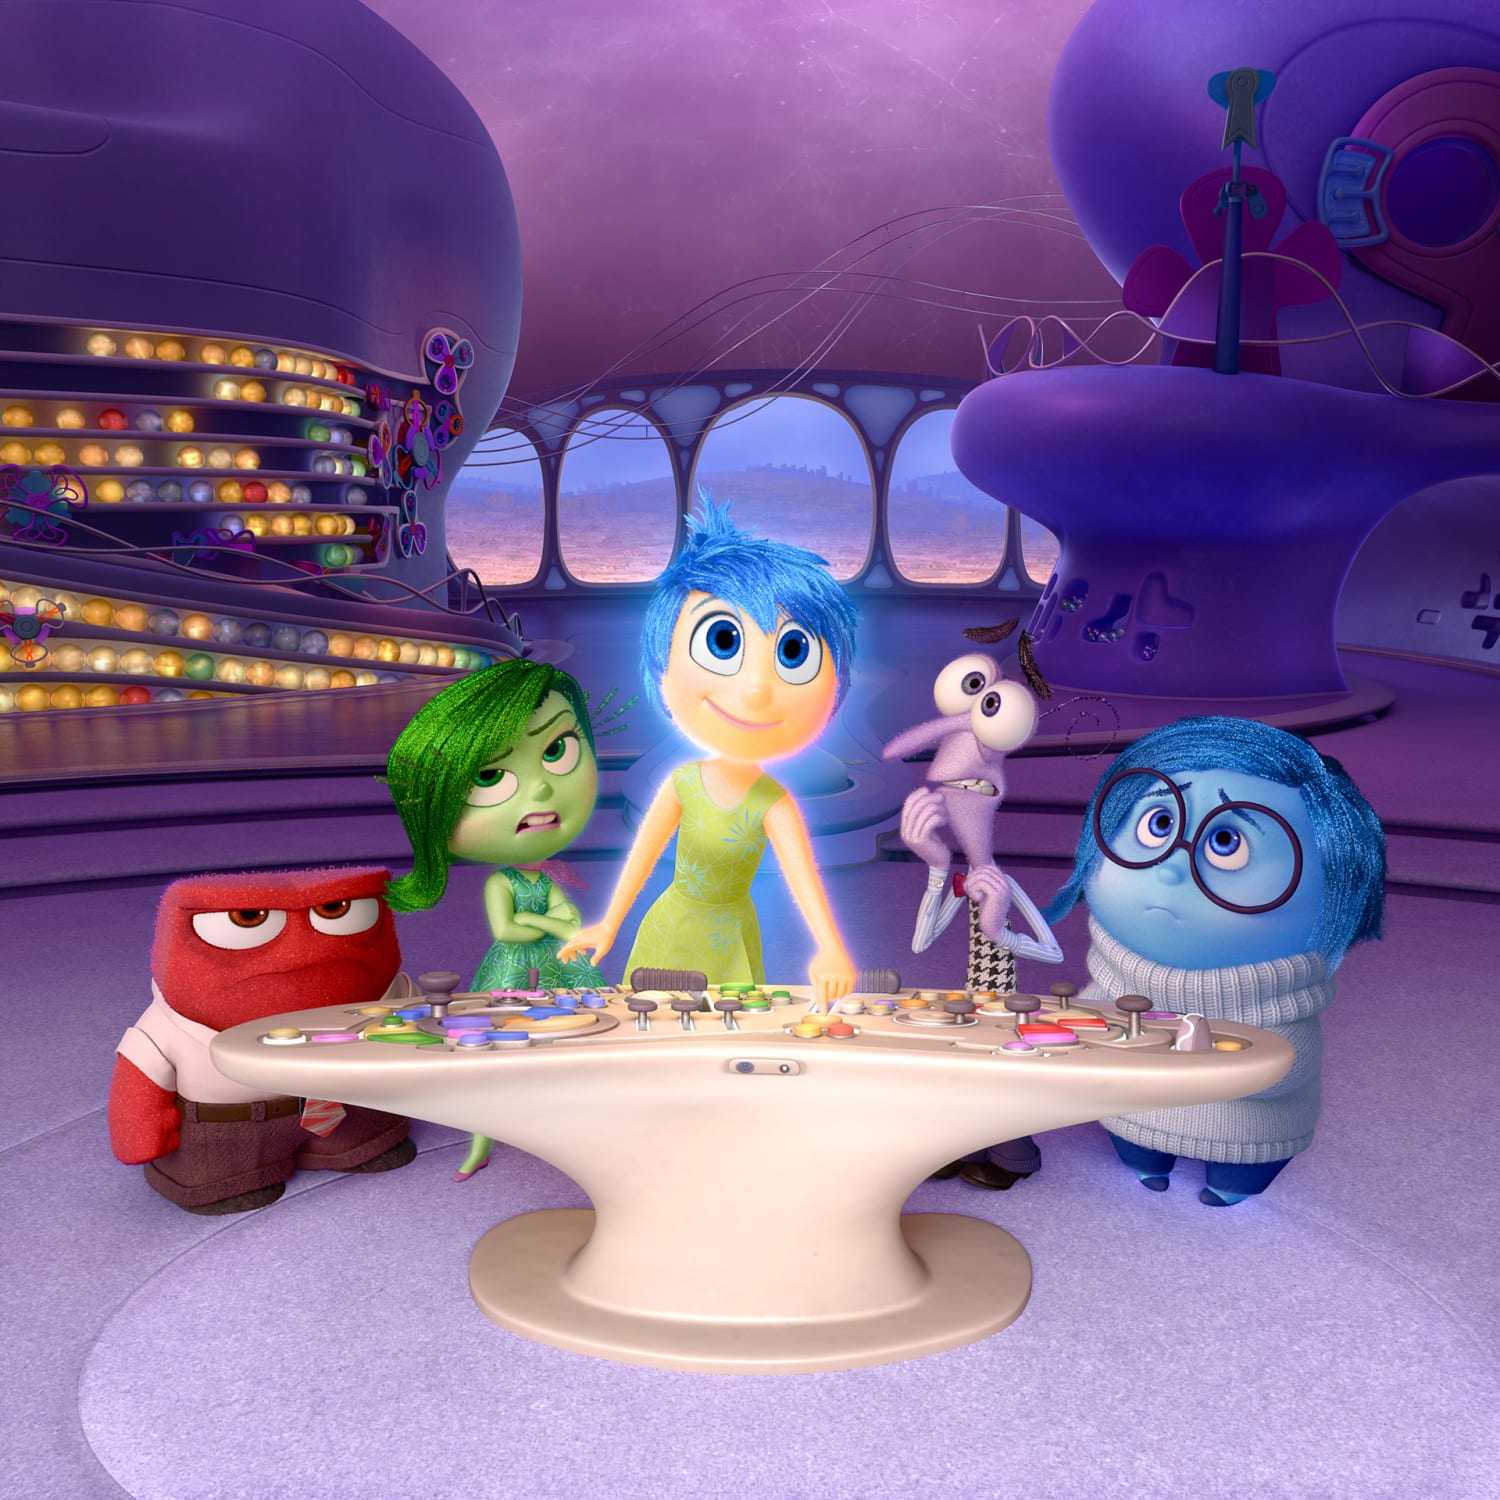 Inside Out' Movie Reflects the Realities and Fantasies of Neuroscience